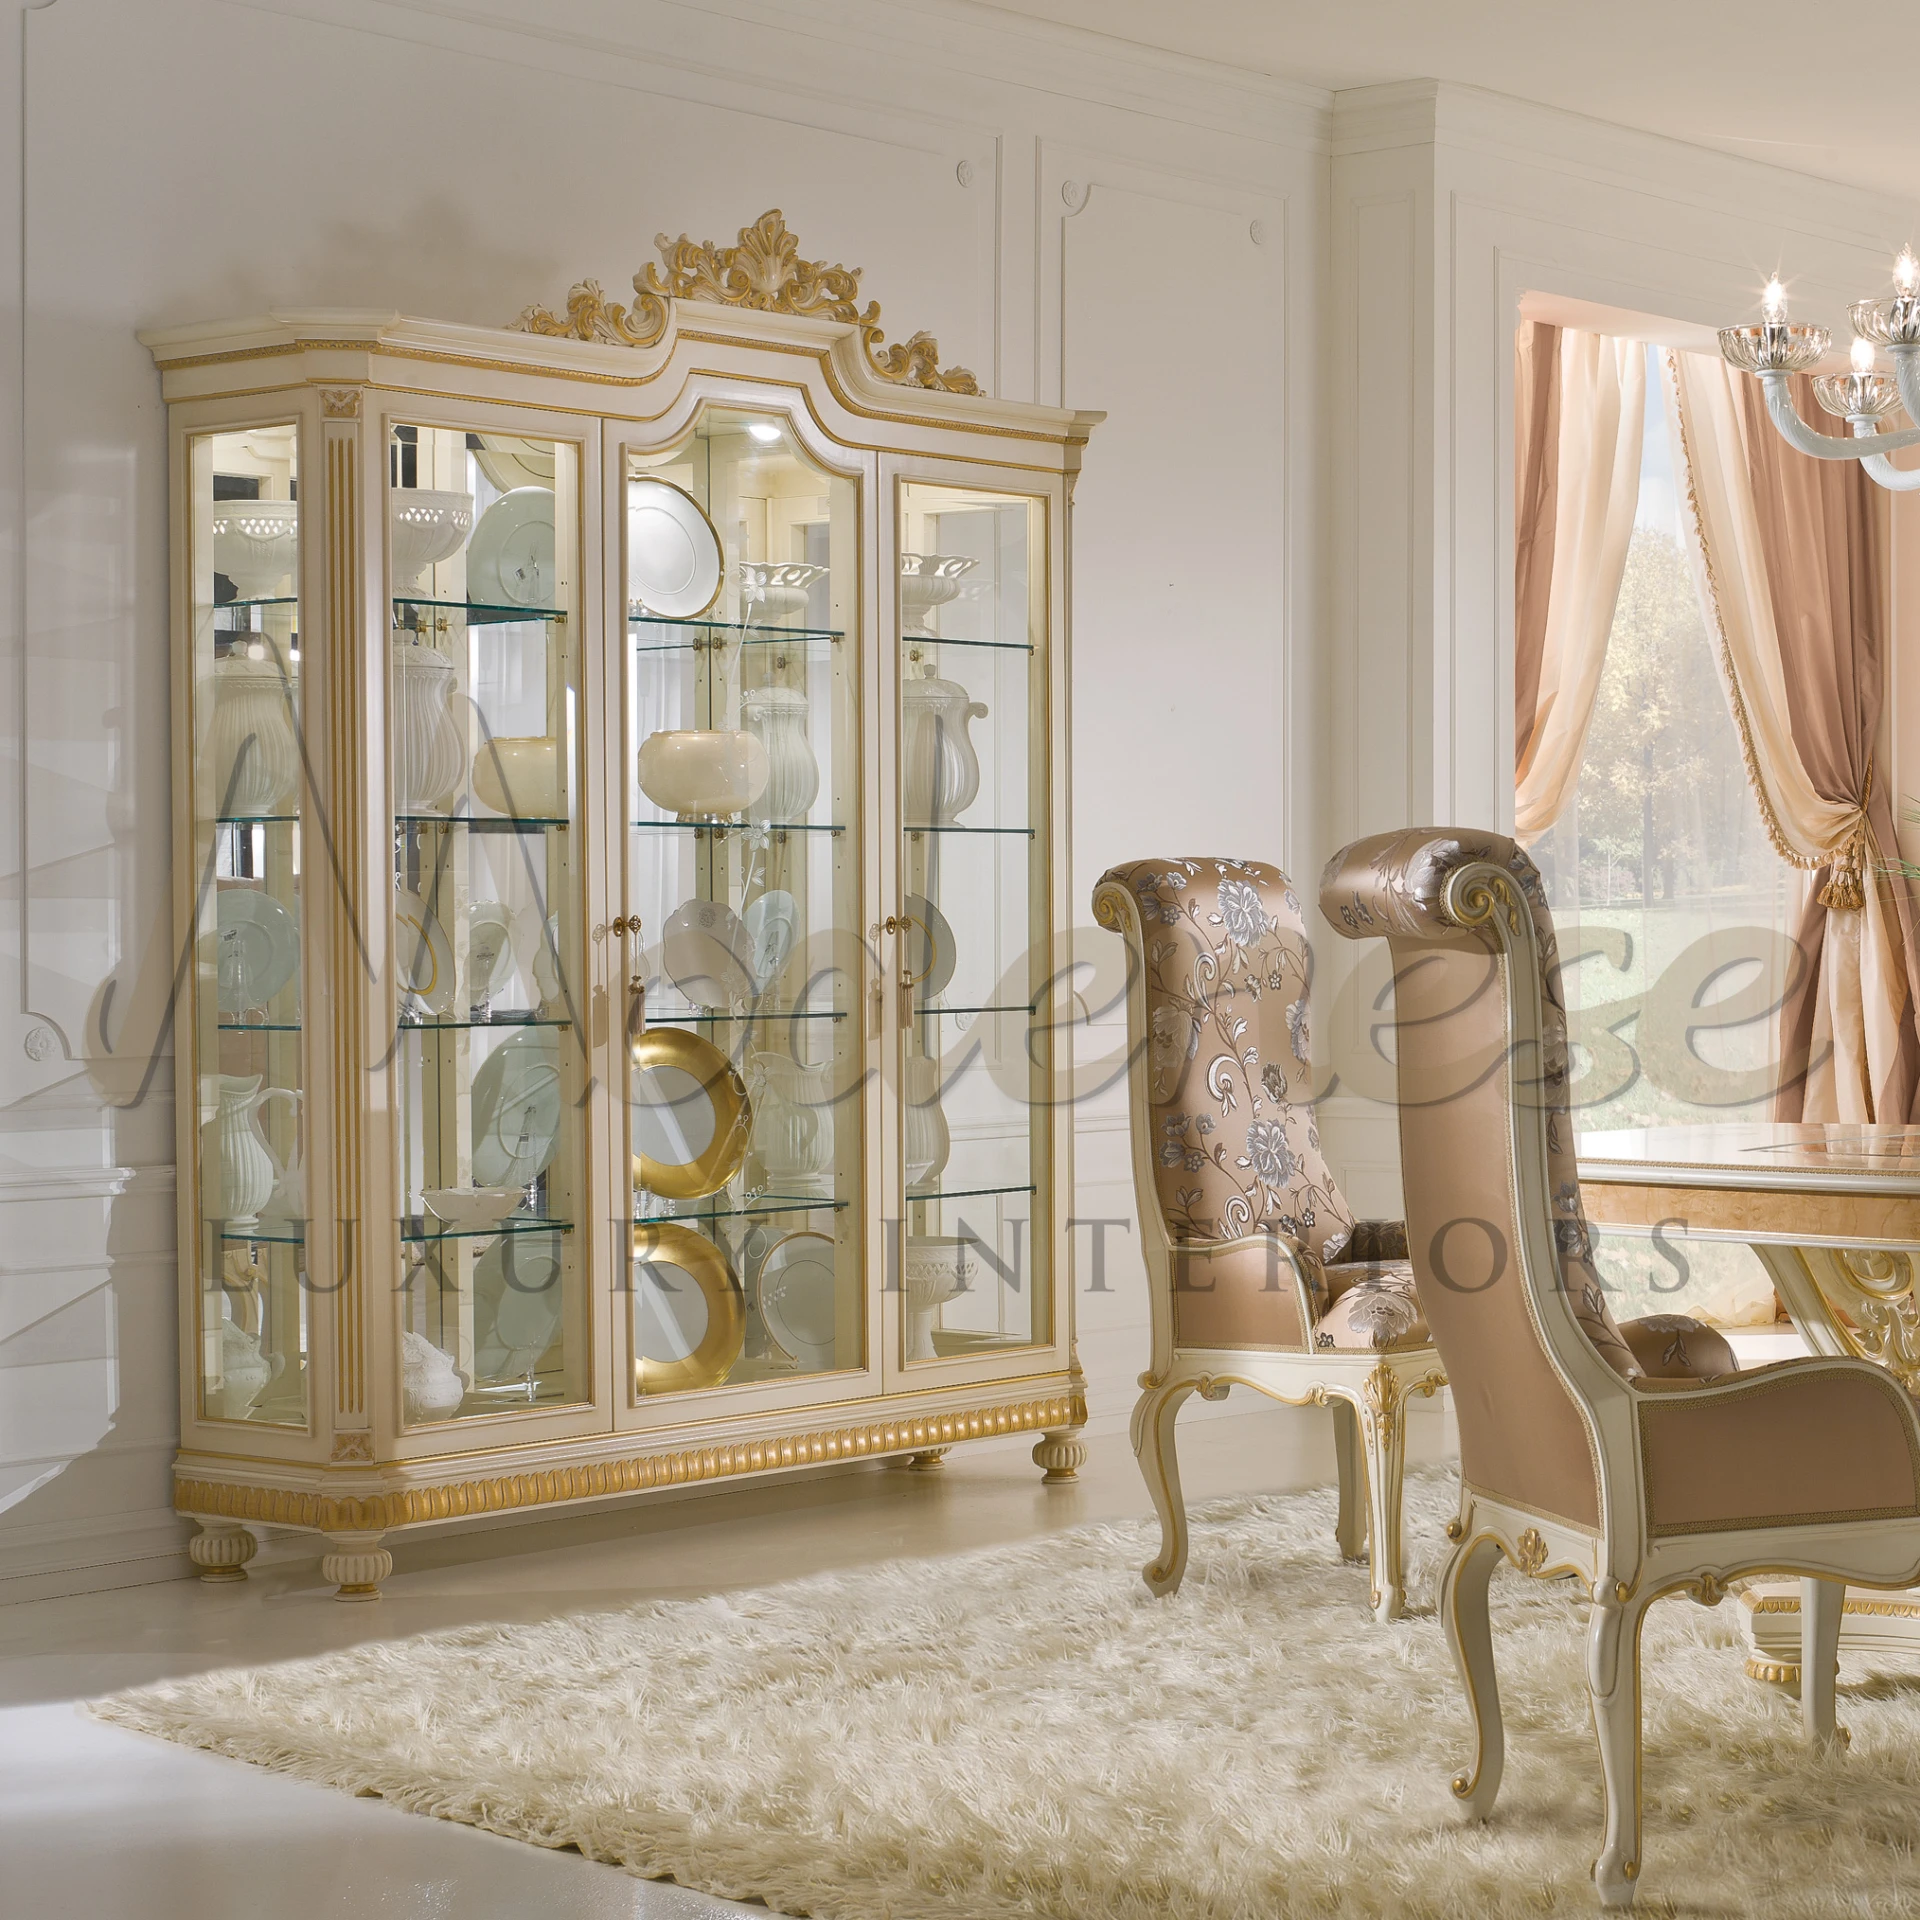 Fancy ivory three doors cabinet along the luxurious dining set and fluffy rug on the floor